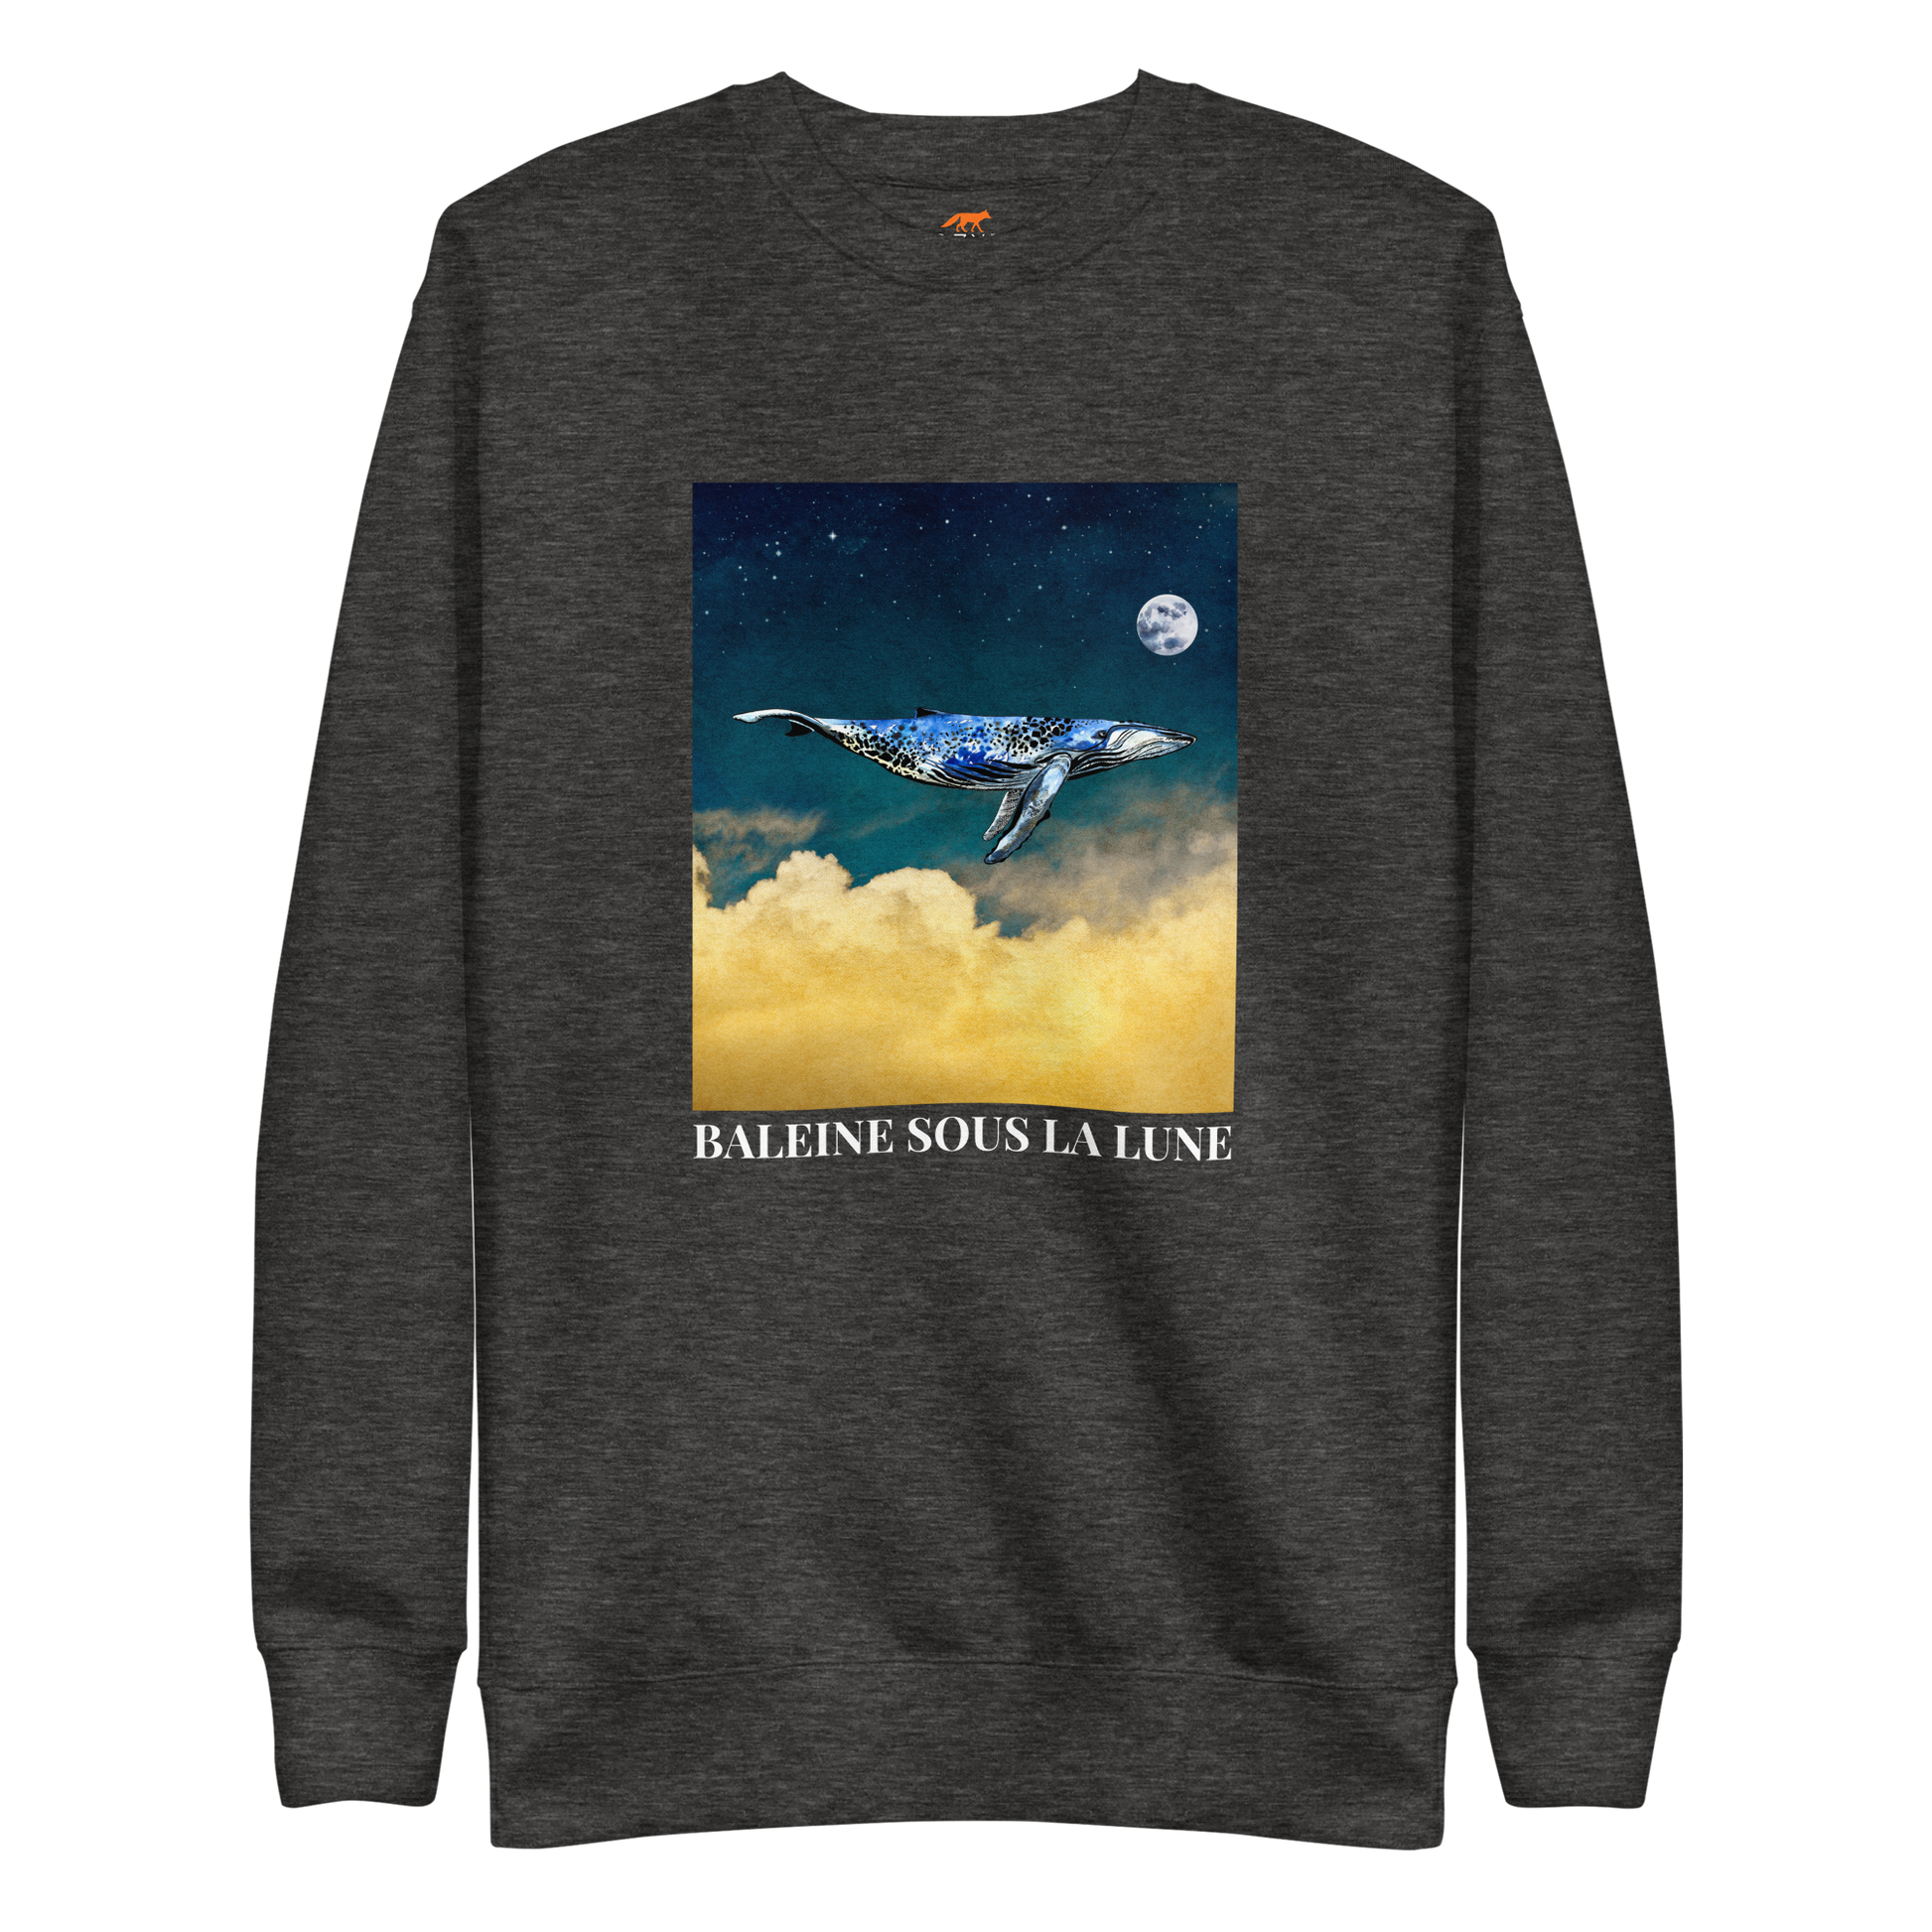 Charcoal Heather Premium Whale Sweatshirt featuring a majestic Whale Under The Moon graphic on the chest - Cool Graphic Whale Sweatshirts - Boozy Fox